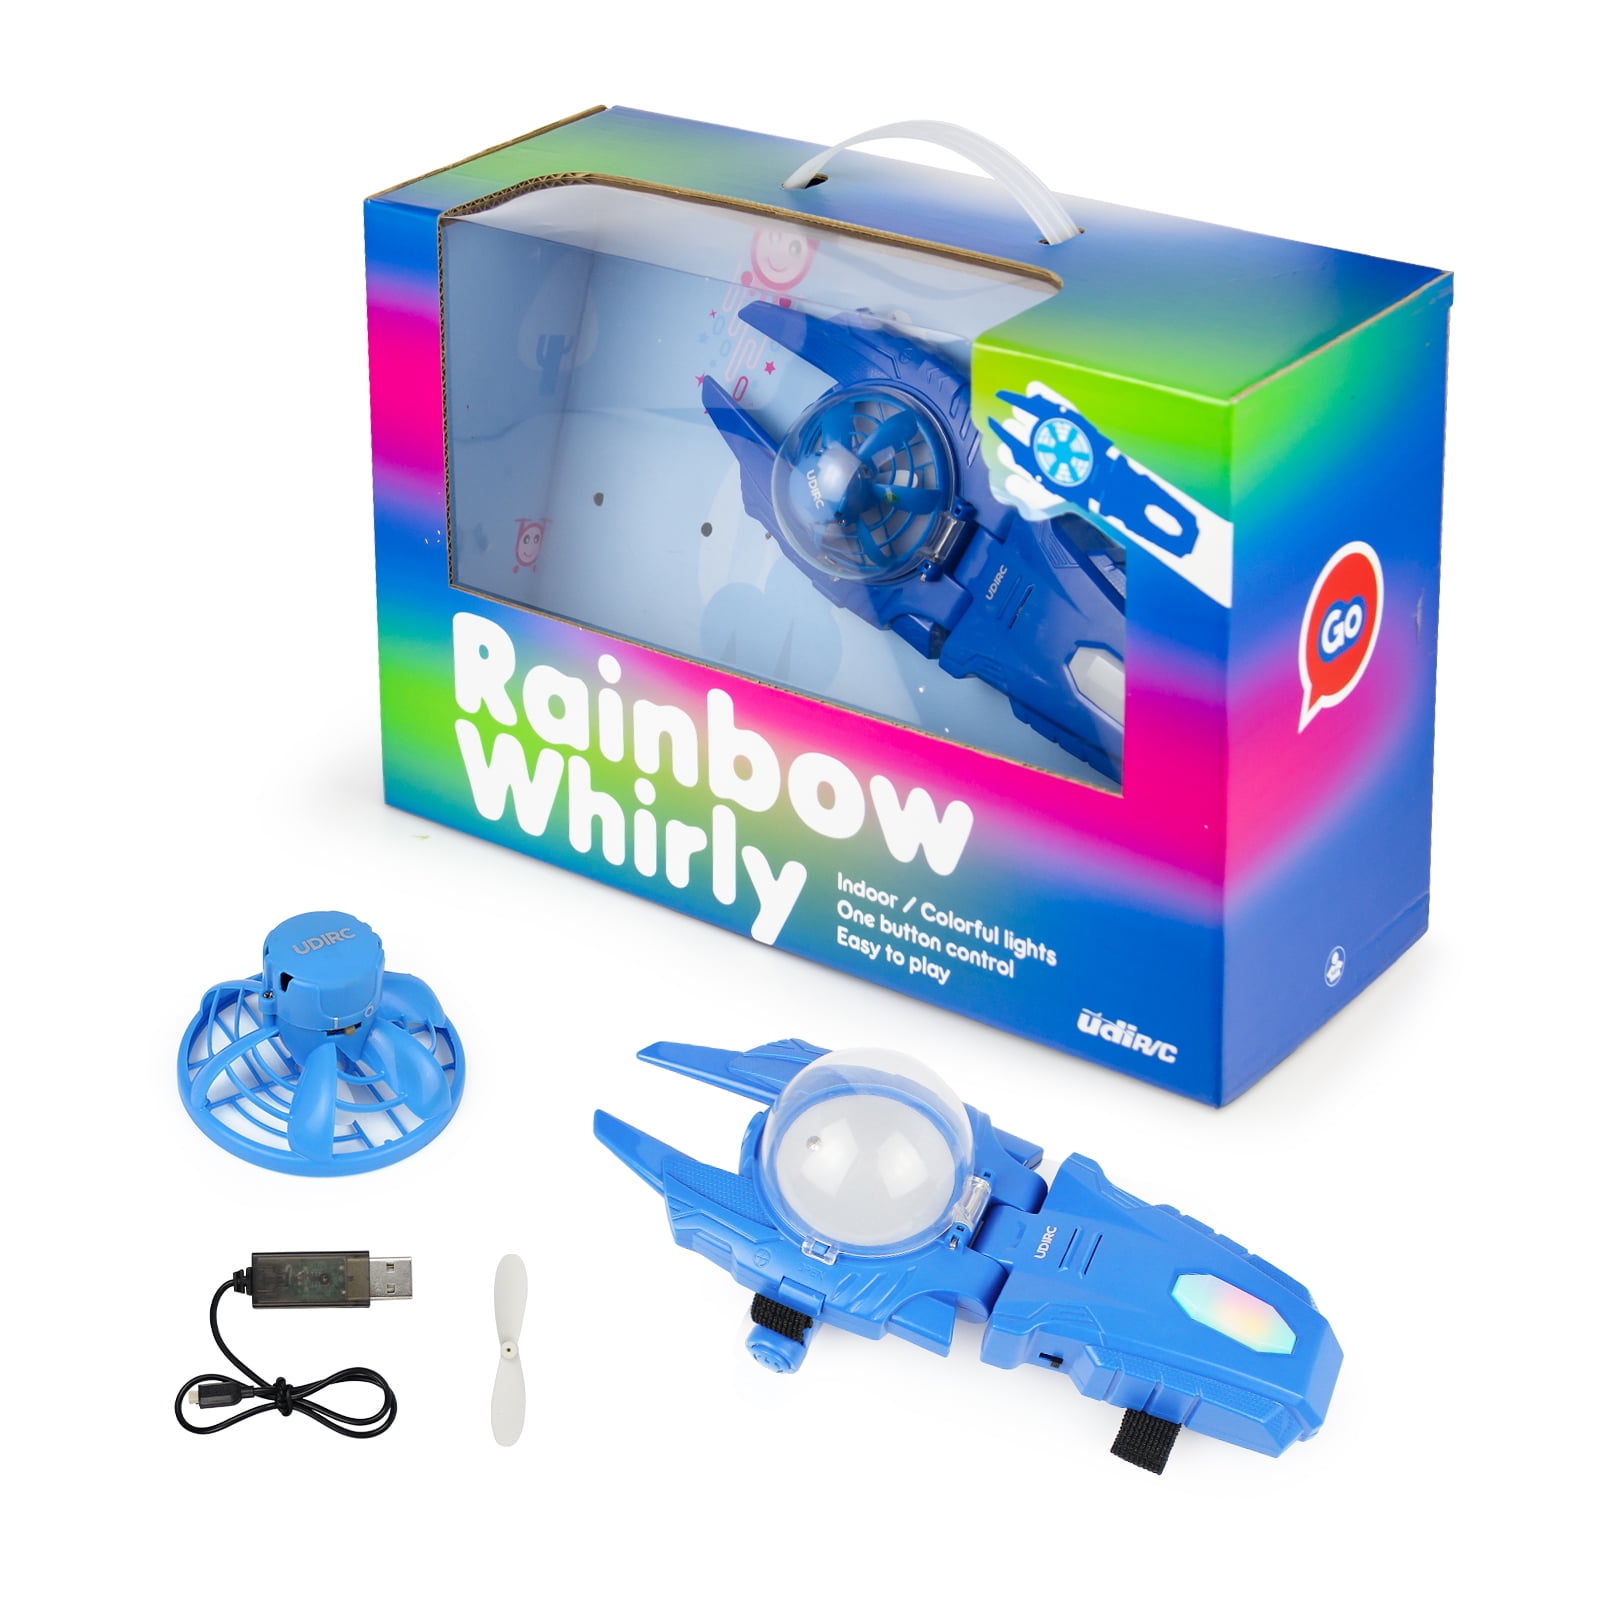 DRONE BLUE ONLY 3 LEFT NEW Hover Star 2.0 Motion Controlled UFO 